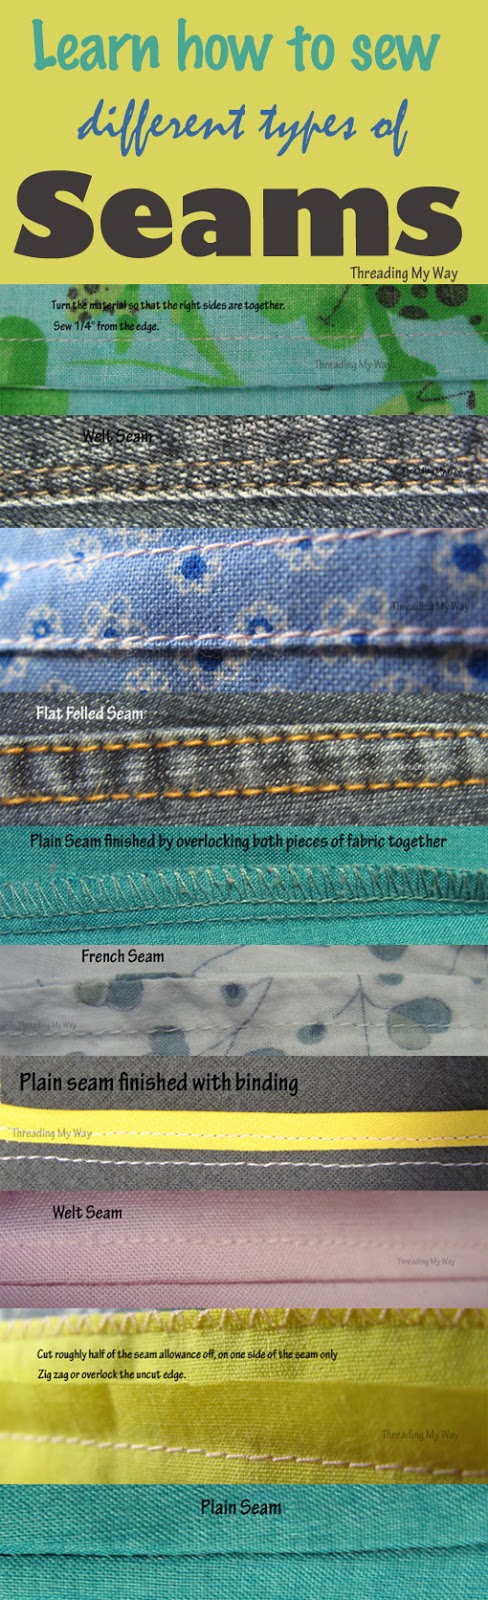 Learn how and when to sew different types of seams - plain, welt, french, flat felled ~ Threading My Way